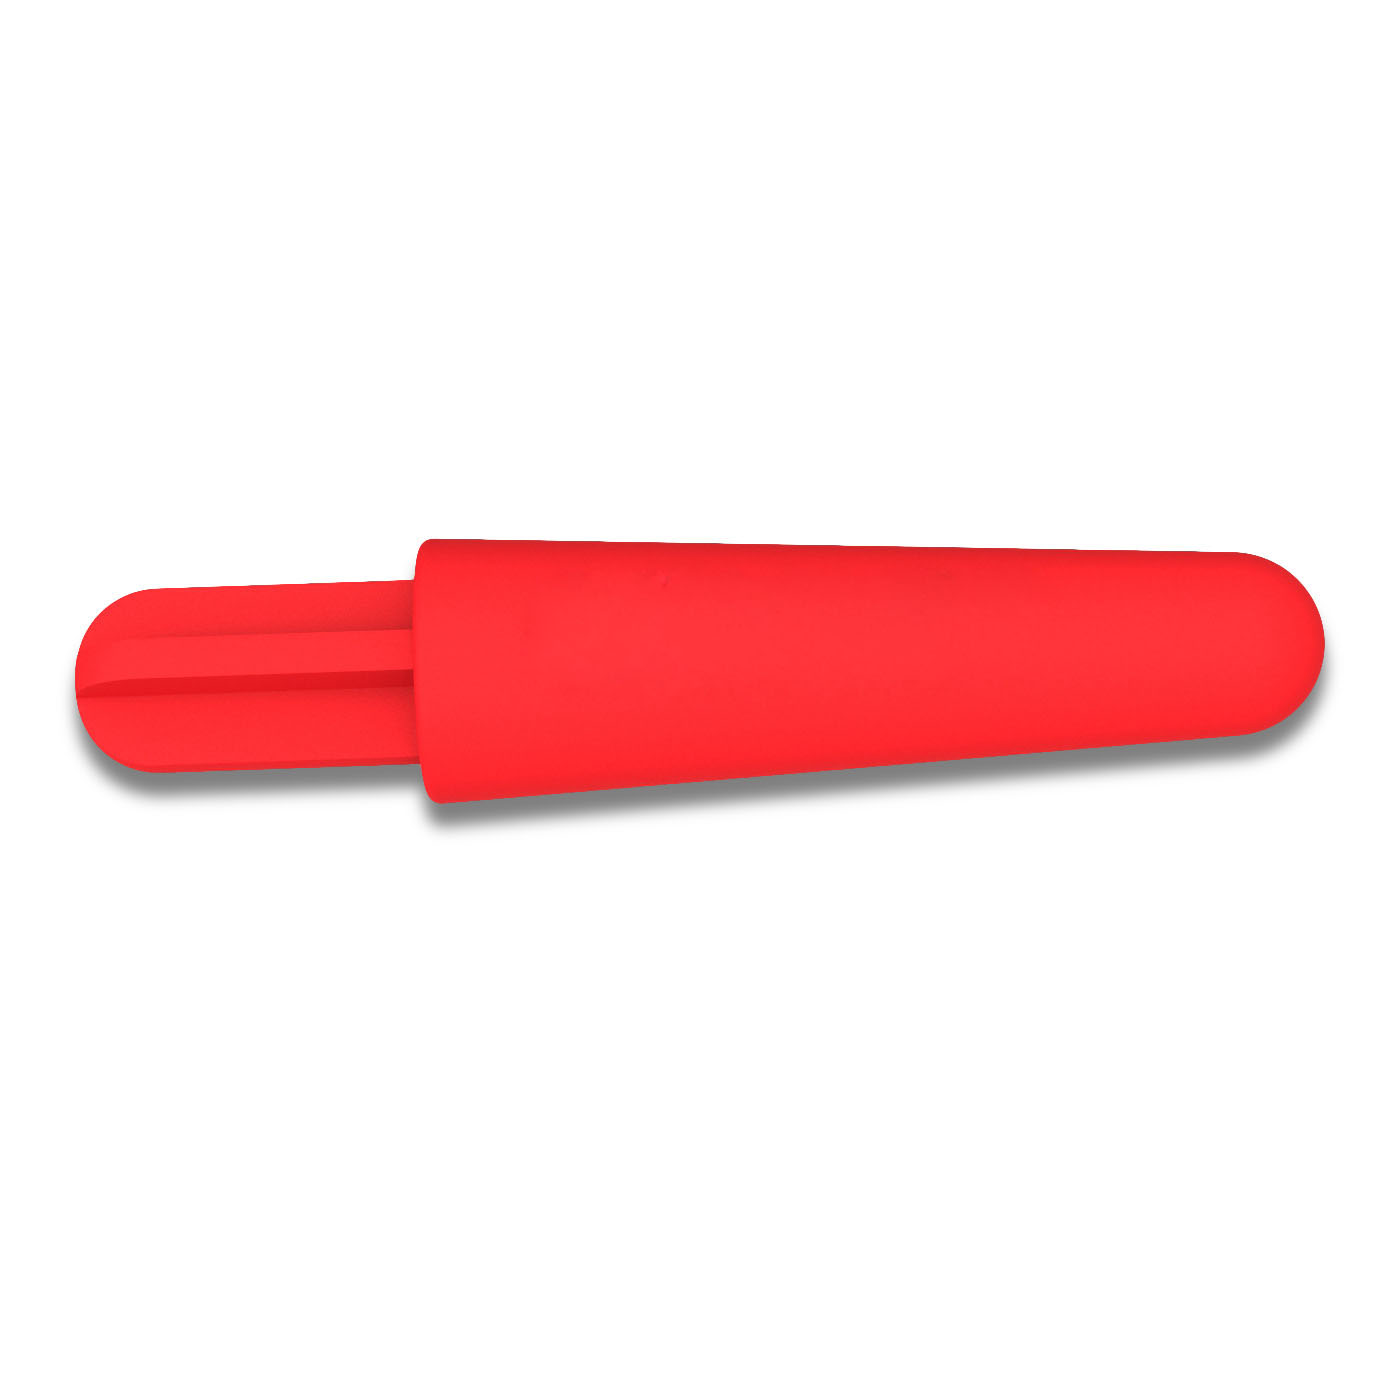 Soft-Silicone-Earpick-Safe-Earwax-Removal-Spiral-Ear-Pick-Cleaner-Remover-Stick-1256100